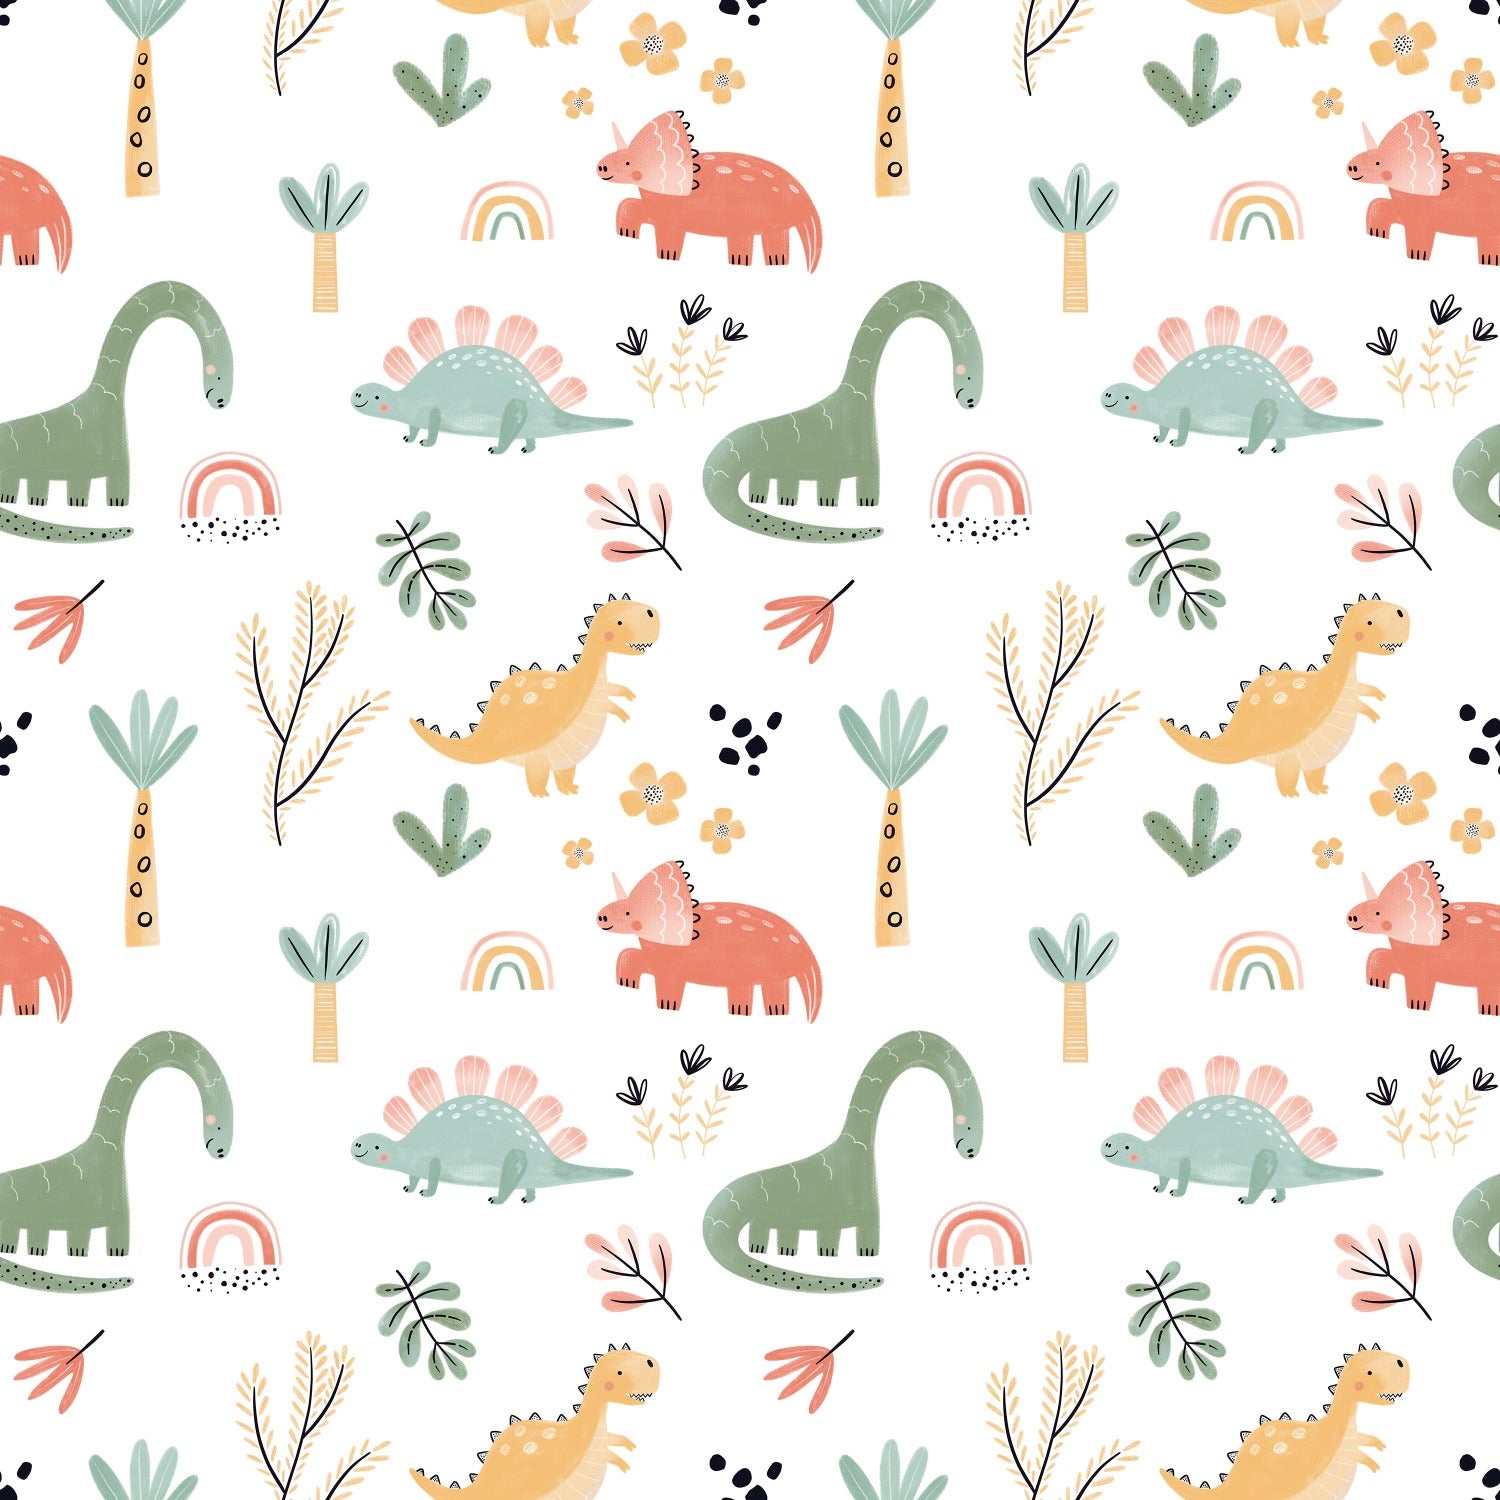 Close-up of the Dinosaur Nursery Wallpaper, highlighting the intricate details of the cute dinosaur characters and accompanying botanical elements in a soft, pastel color scheme, perfect for a nurturing and creative nursery environment.